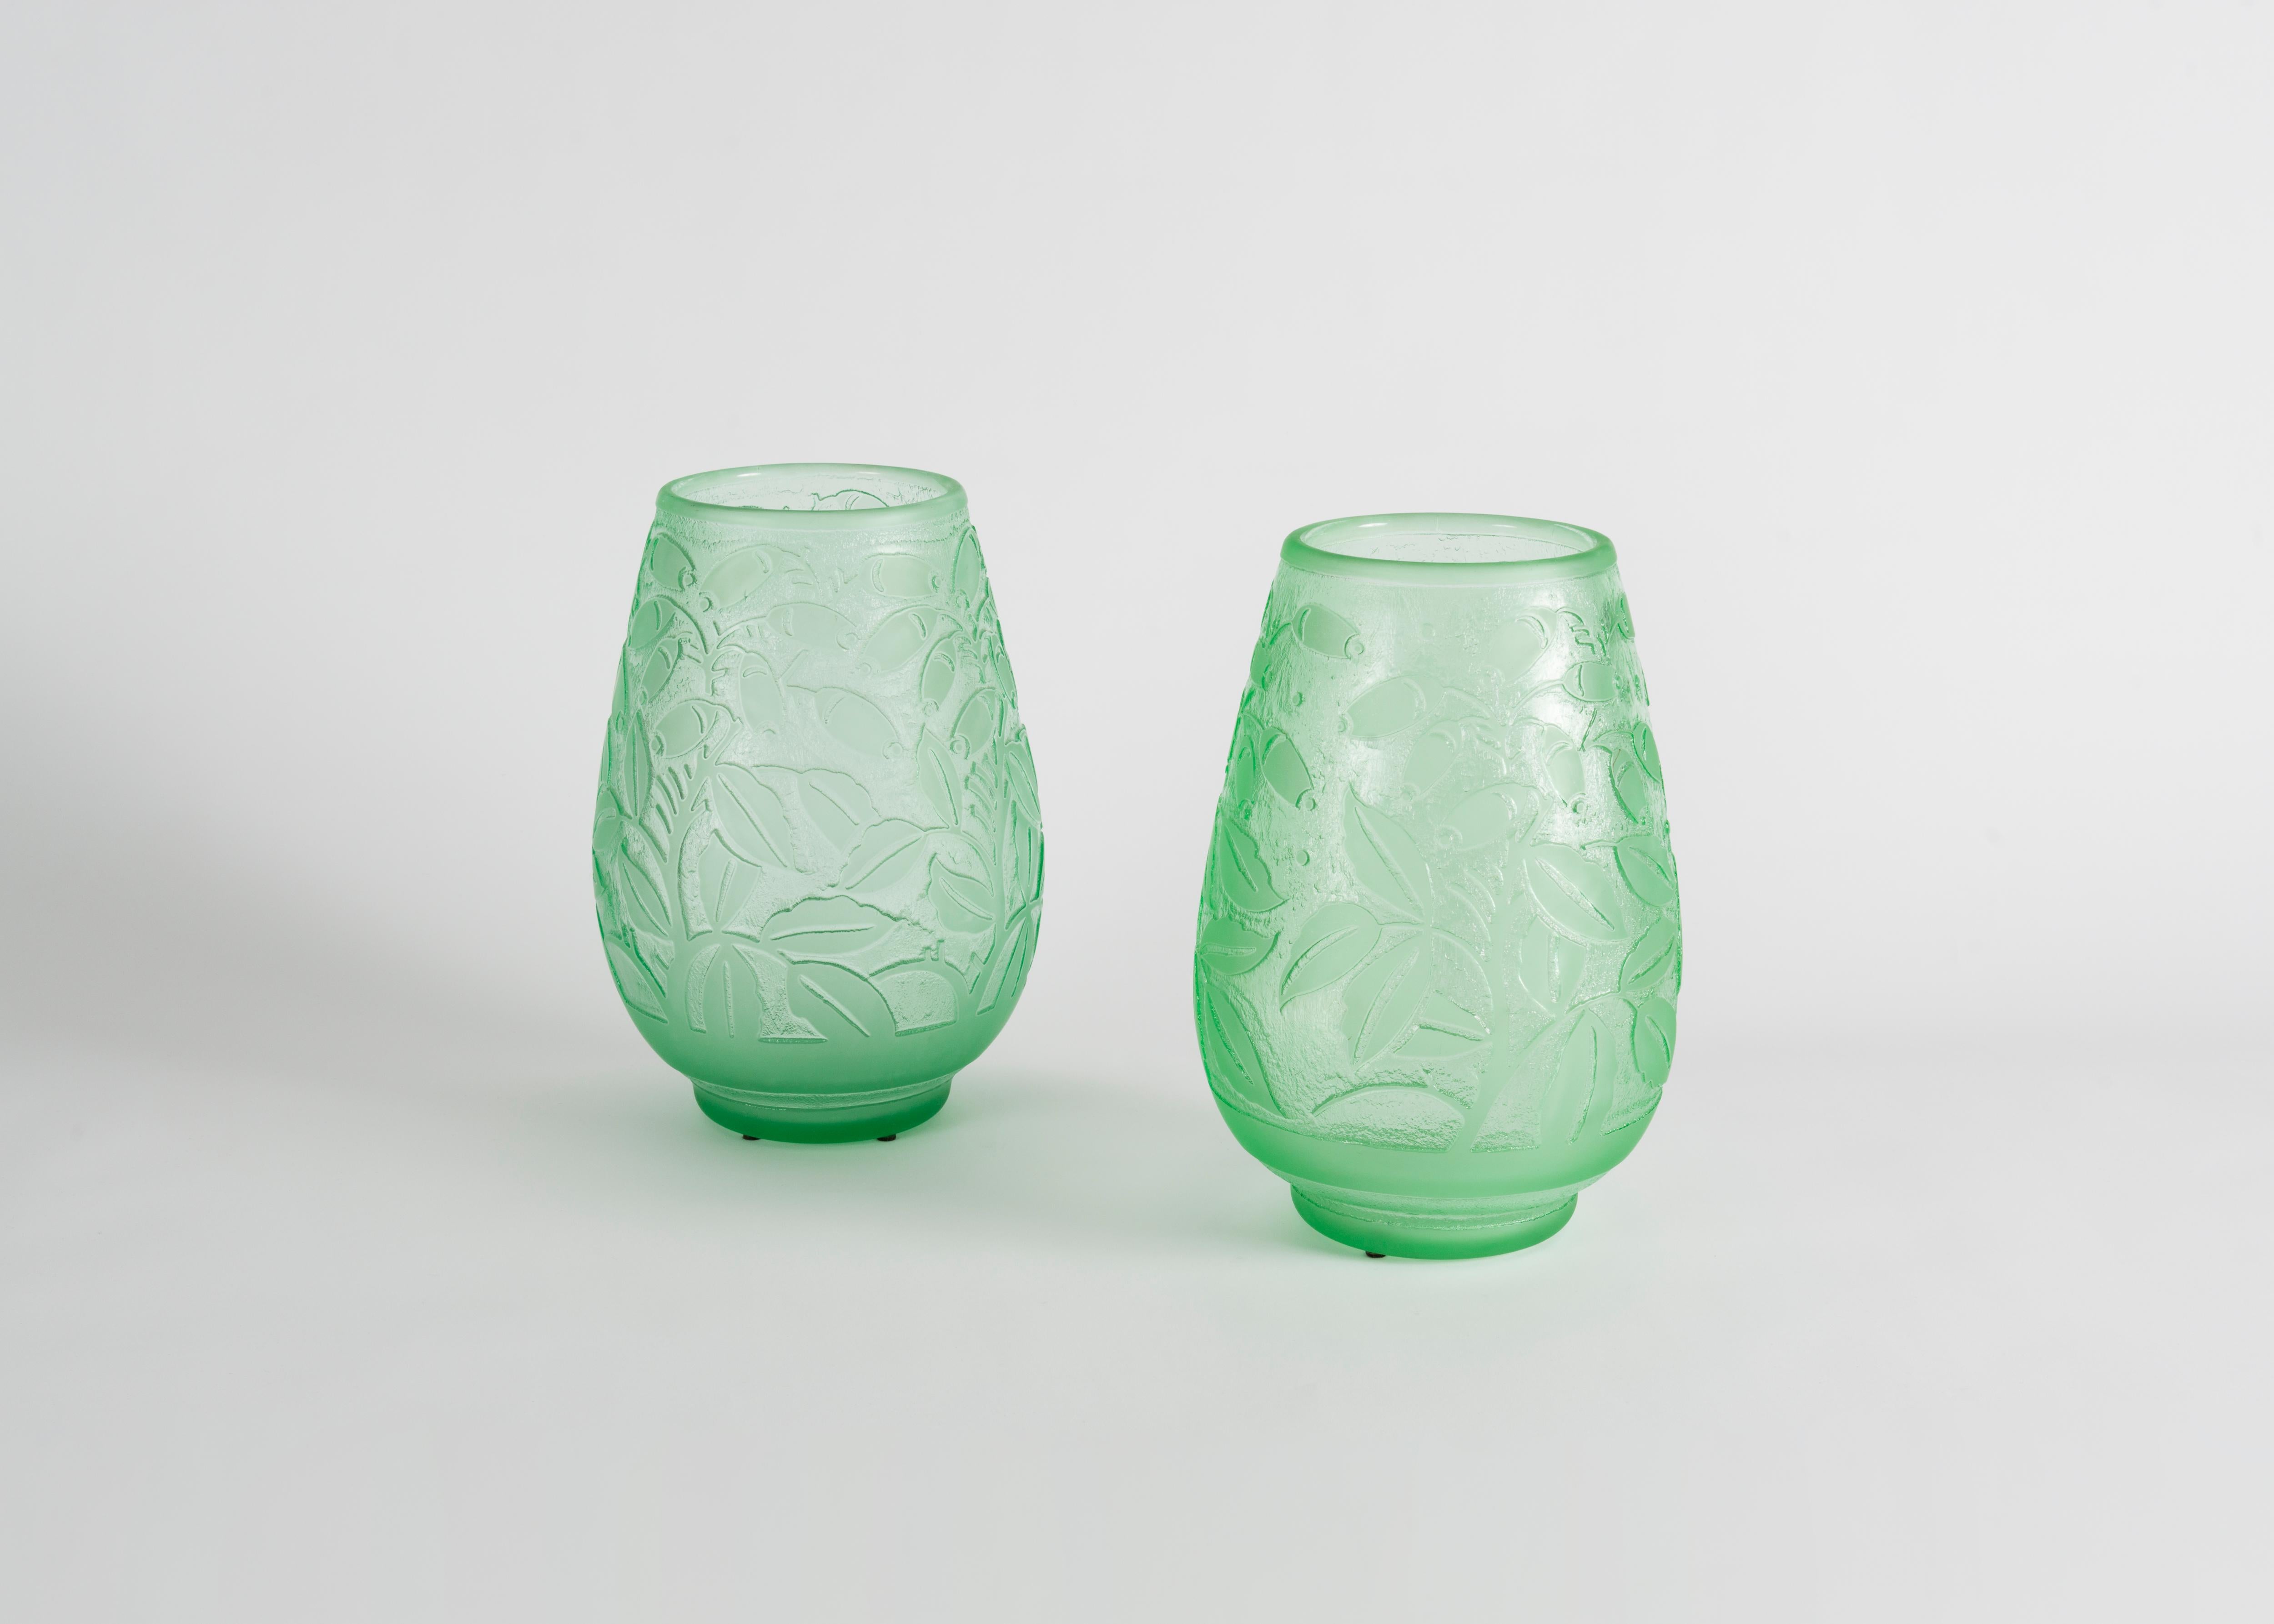 Etched Daum, Incised Art Deco Glass Vases, France, Early 20th Century